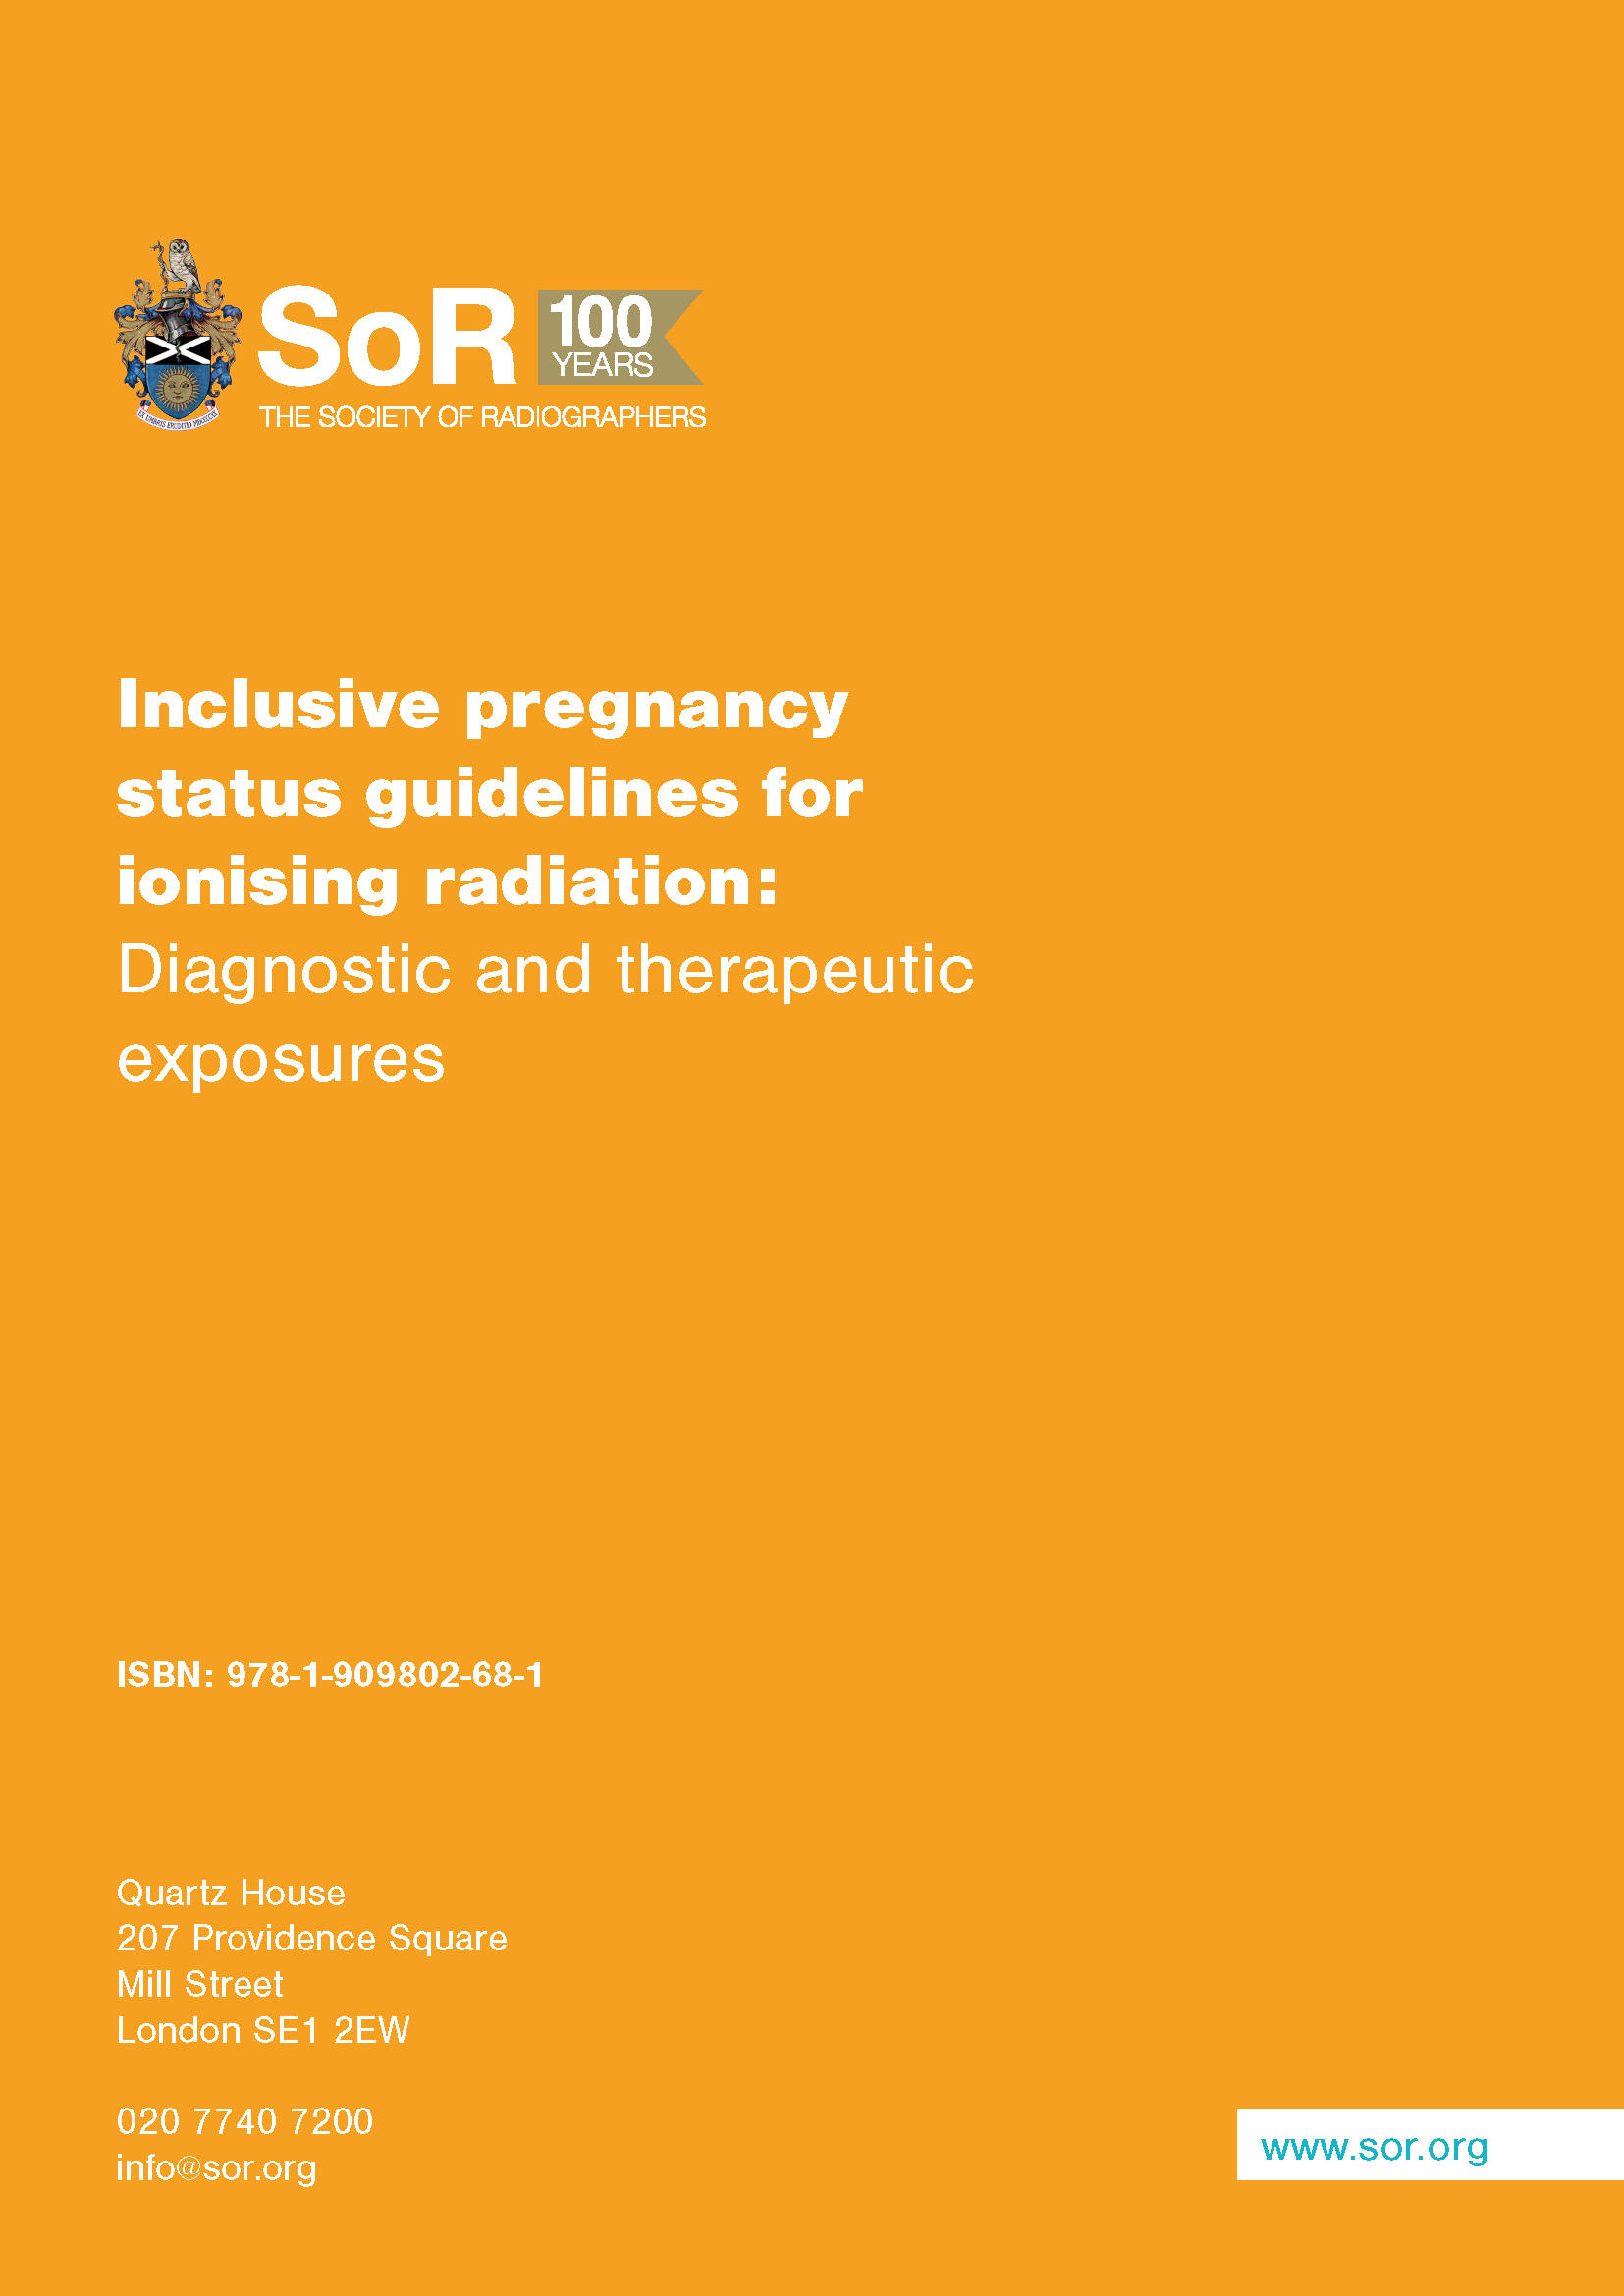 Inclusive pregnancy status guidelines for ionising radiation: Diagnostic and therapeutic exposures